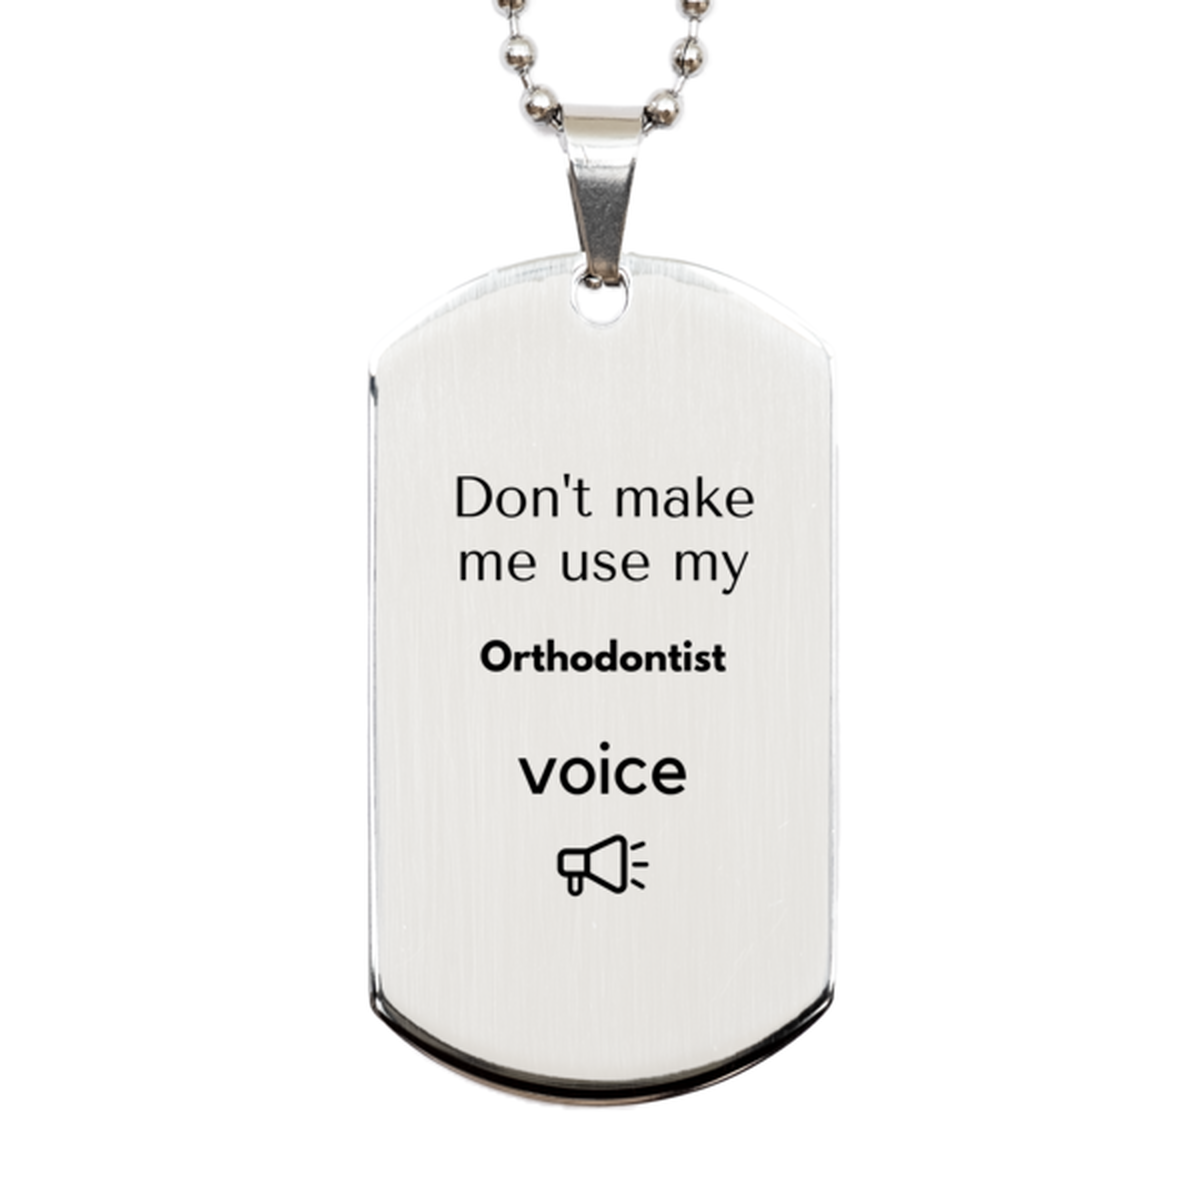 Don't make me use my Orthodontist voice, Sarcasm Orthodontist Gifts, Christmas Orthodontist Silver Dog Tag Birthday Unique Gifts For Orthodontist Coworkers, Men, Women, Colleague, Friends